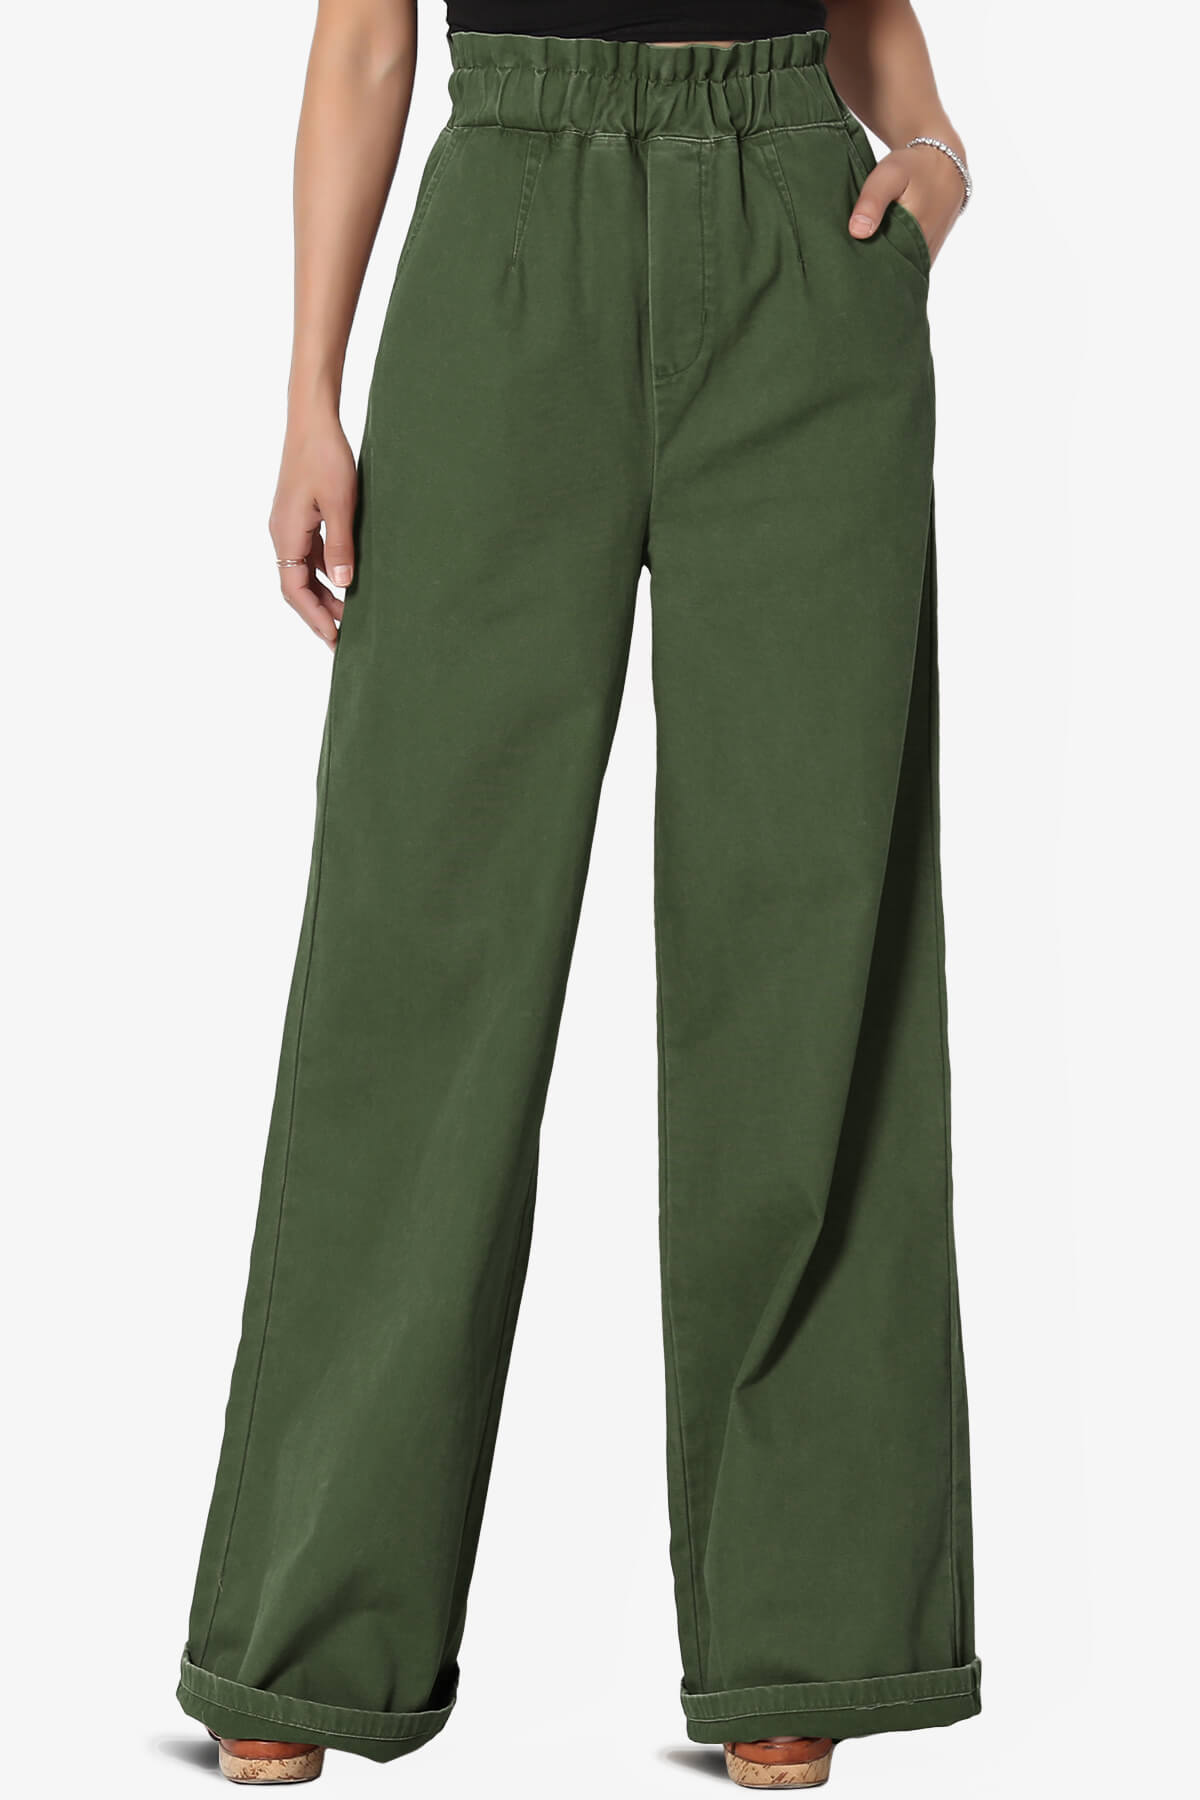 Load image into Gallery viewer, Fateful Twill High Waist Wide Leg Pants ARMY GREEN_1
